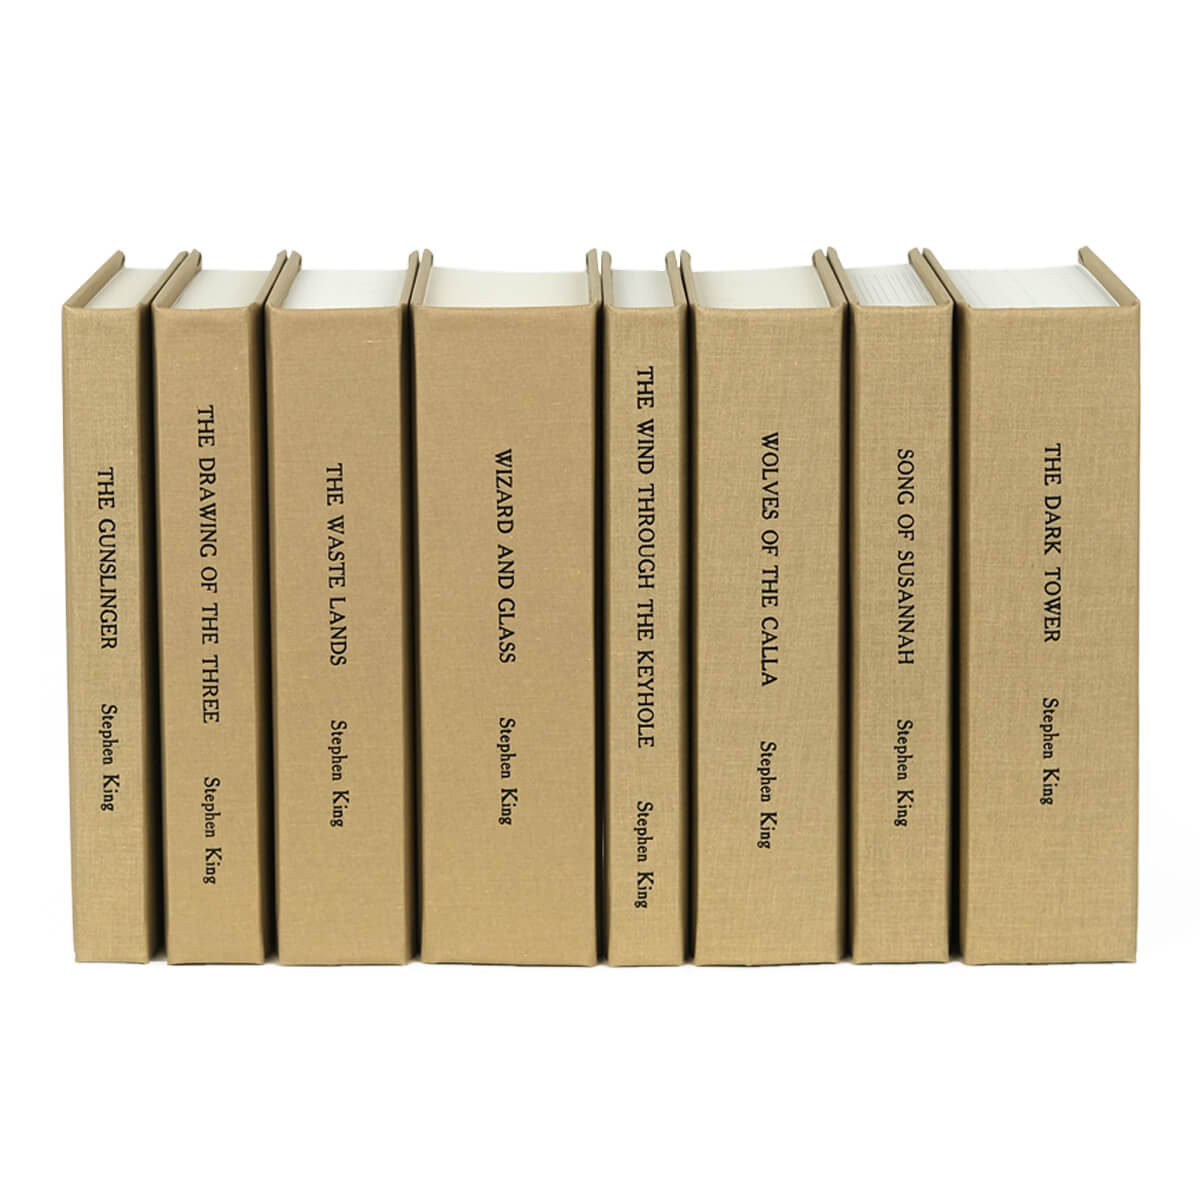 Unjacketed beige spines in The Dark Tower custom collectible set from Juniper Custom. Title and author name typed down spine in black font.